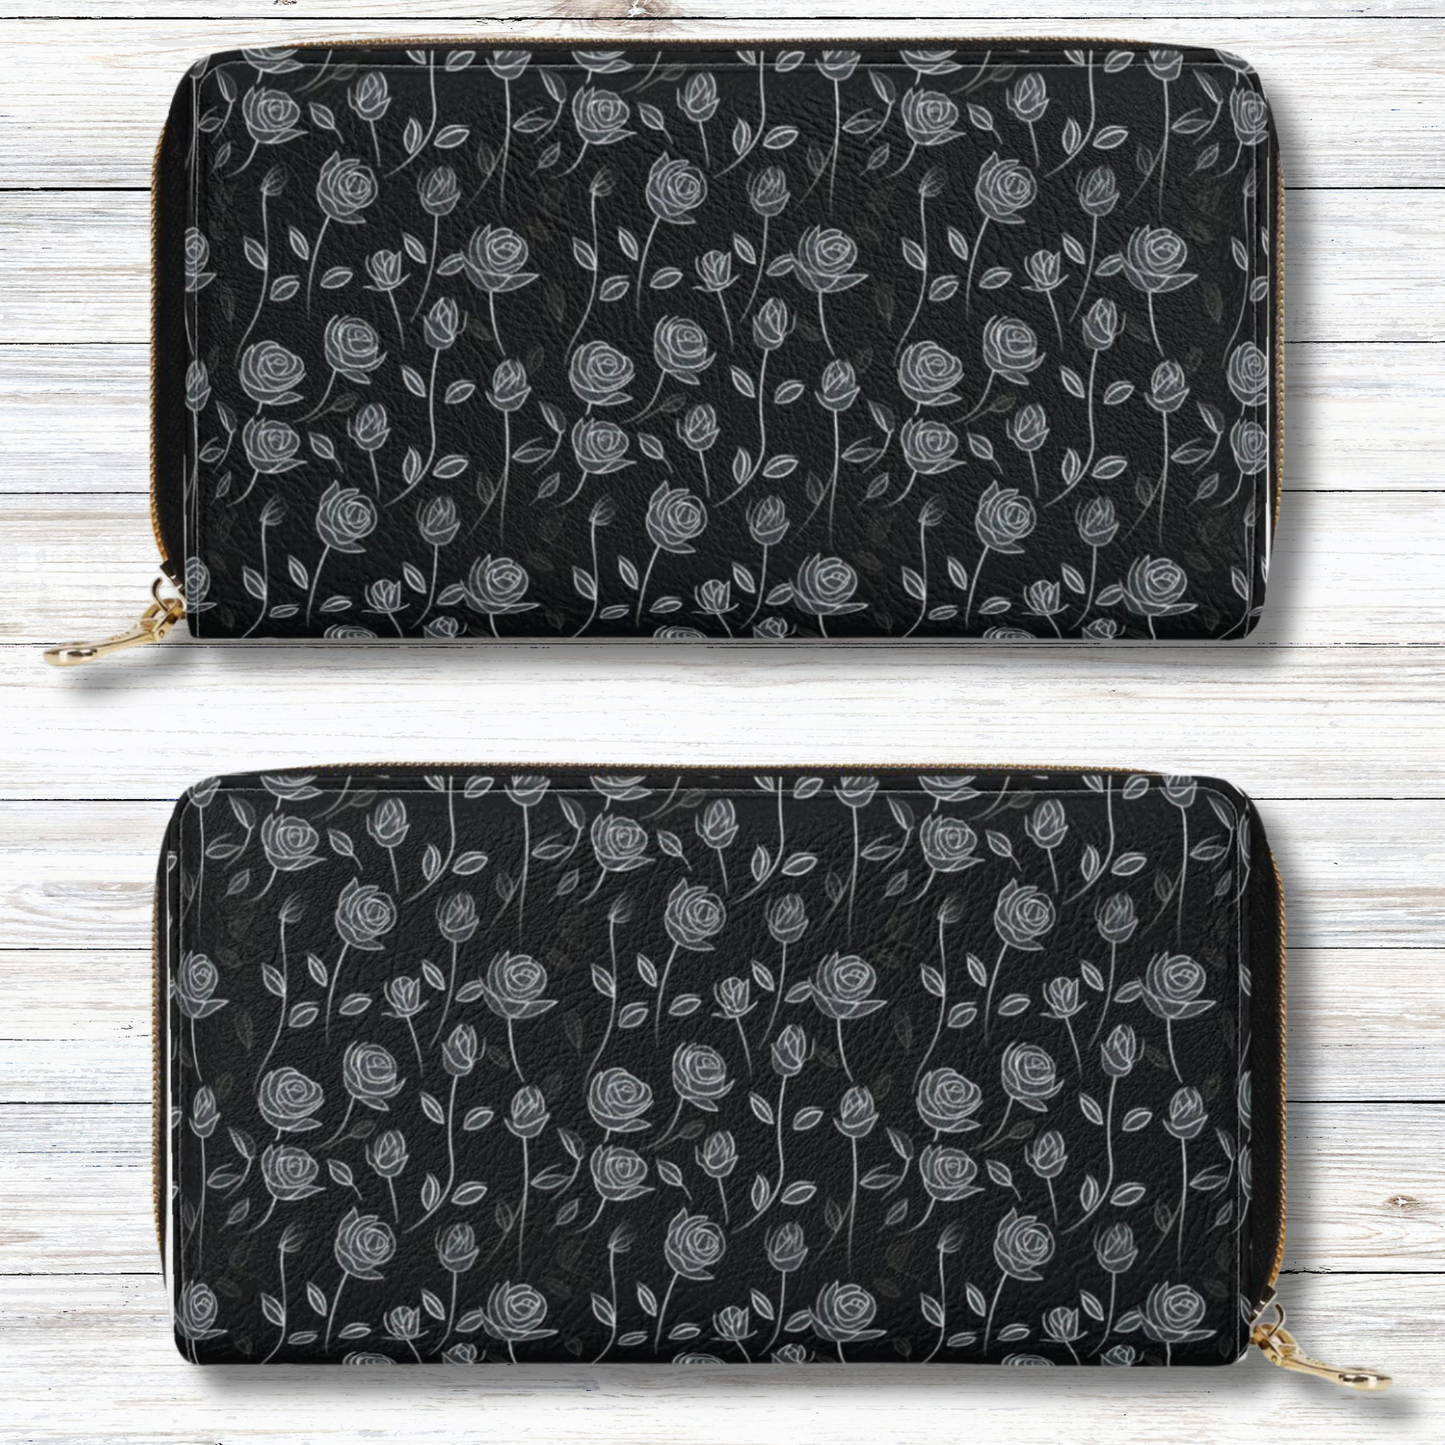 Contrasting Elegance: White Outlined Roses on a Black Background Leather Wallet (PU)